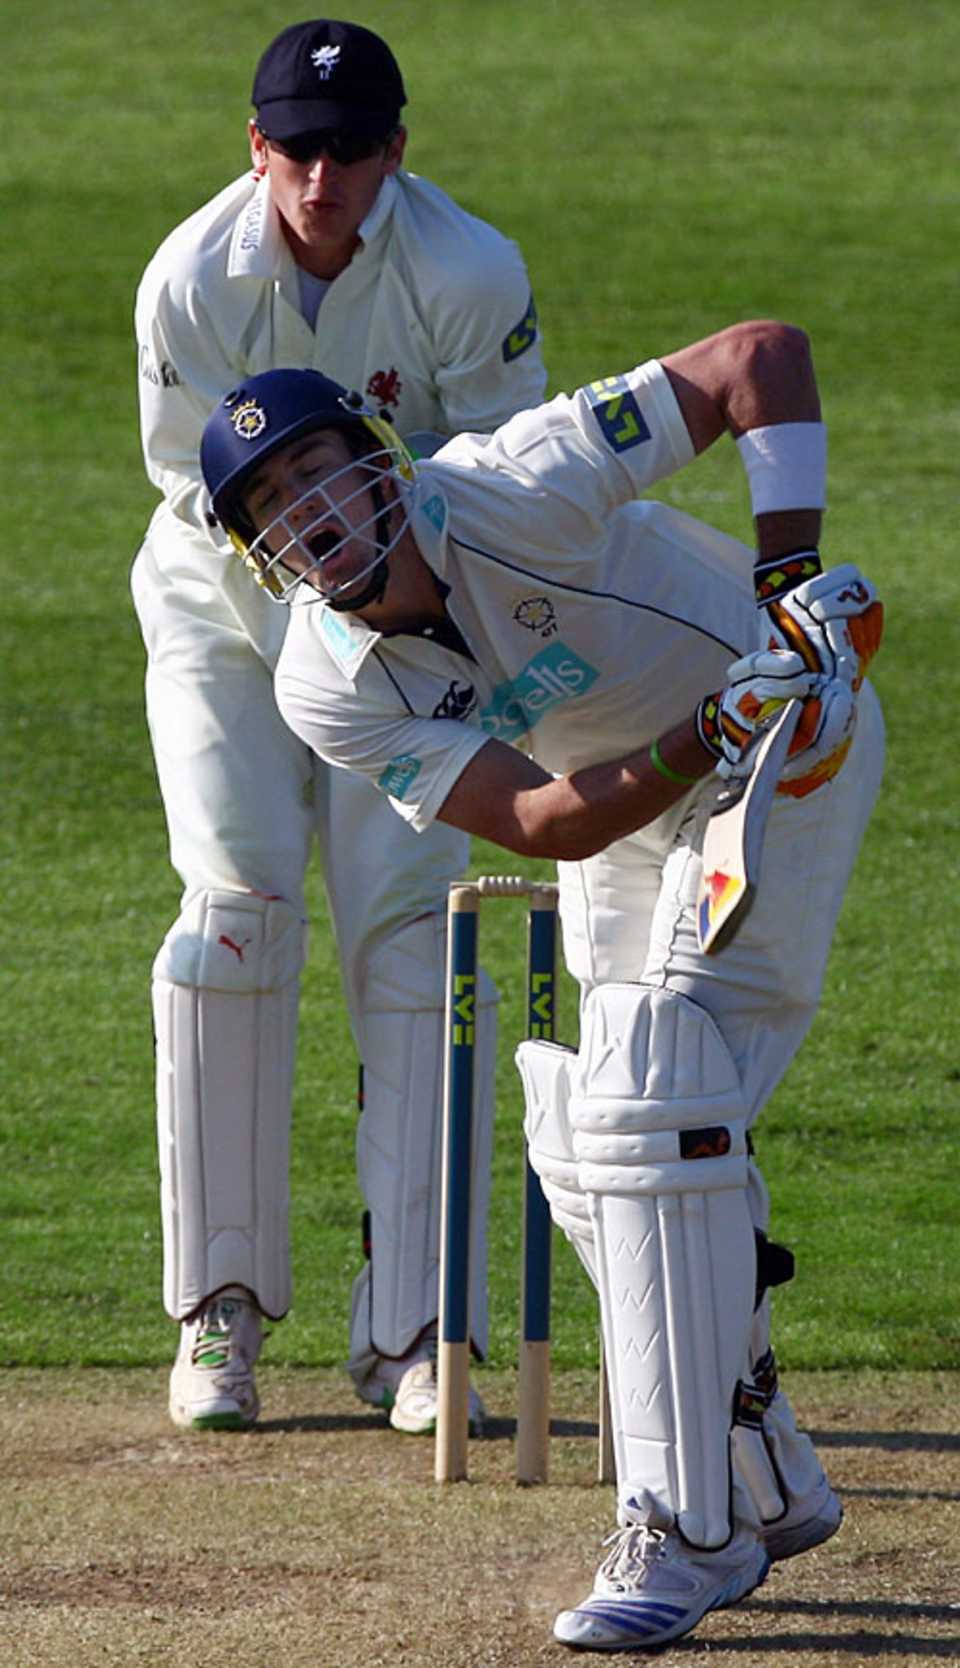 Bang on target ... Kevin Pietersen feels the pain after being struck, Somerset v Hampshire, County Championship, Taunton, May 7, 2008